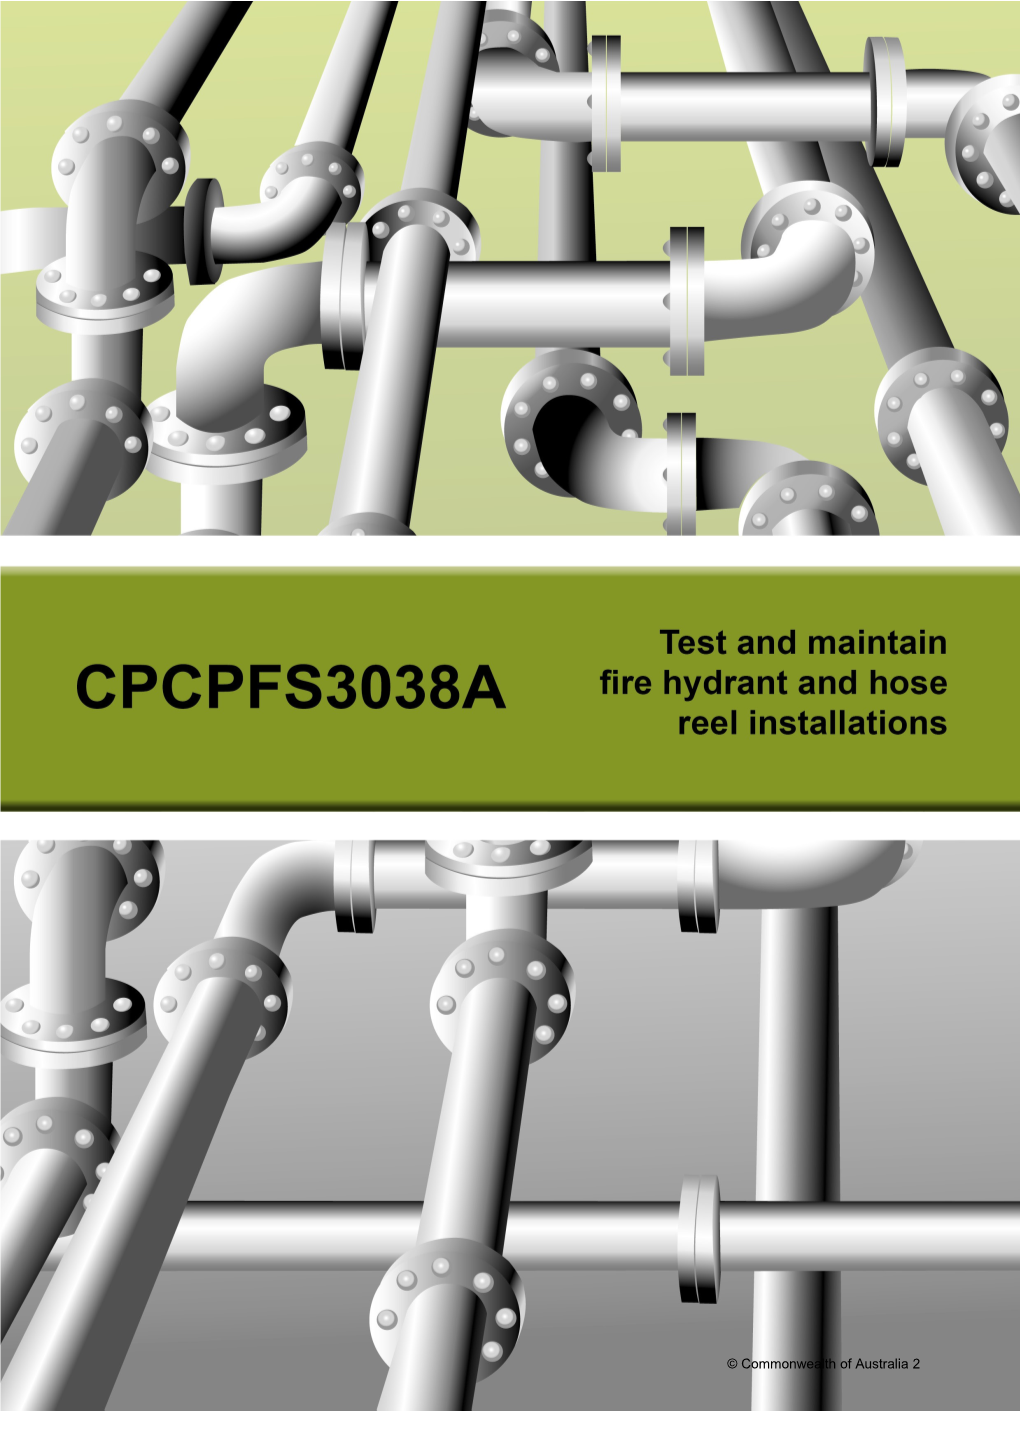 Cpcpfs3038a - Test and Maintain Fire Hydrant and Hose Reel Installations